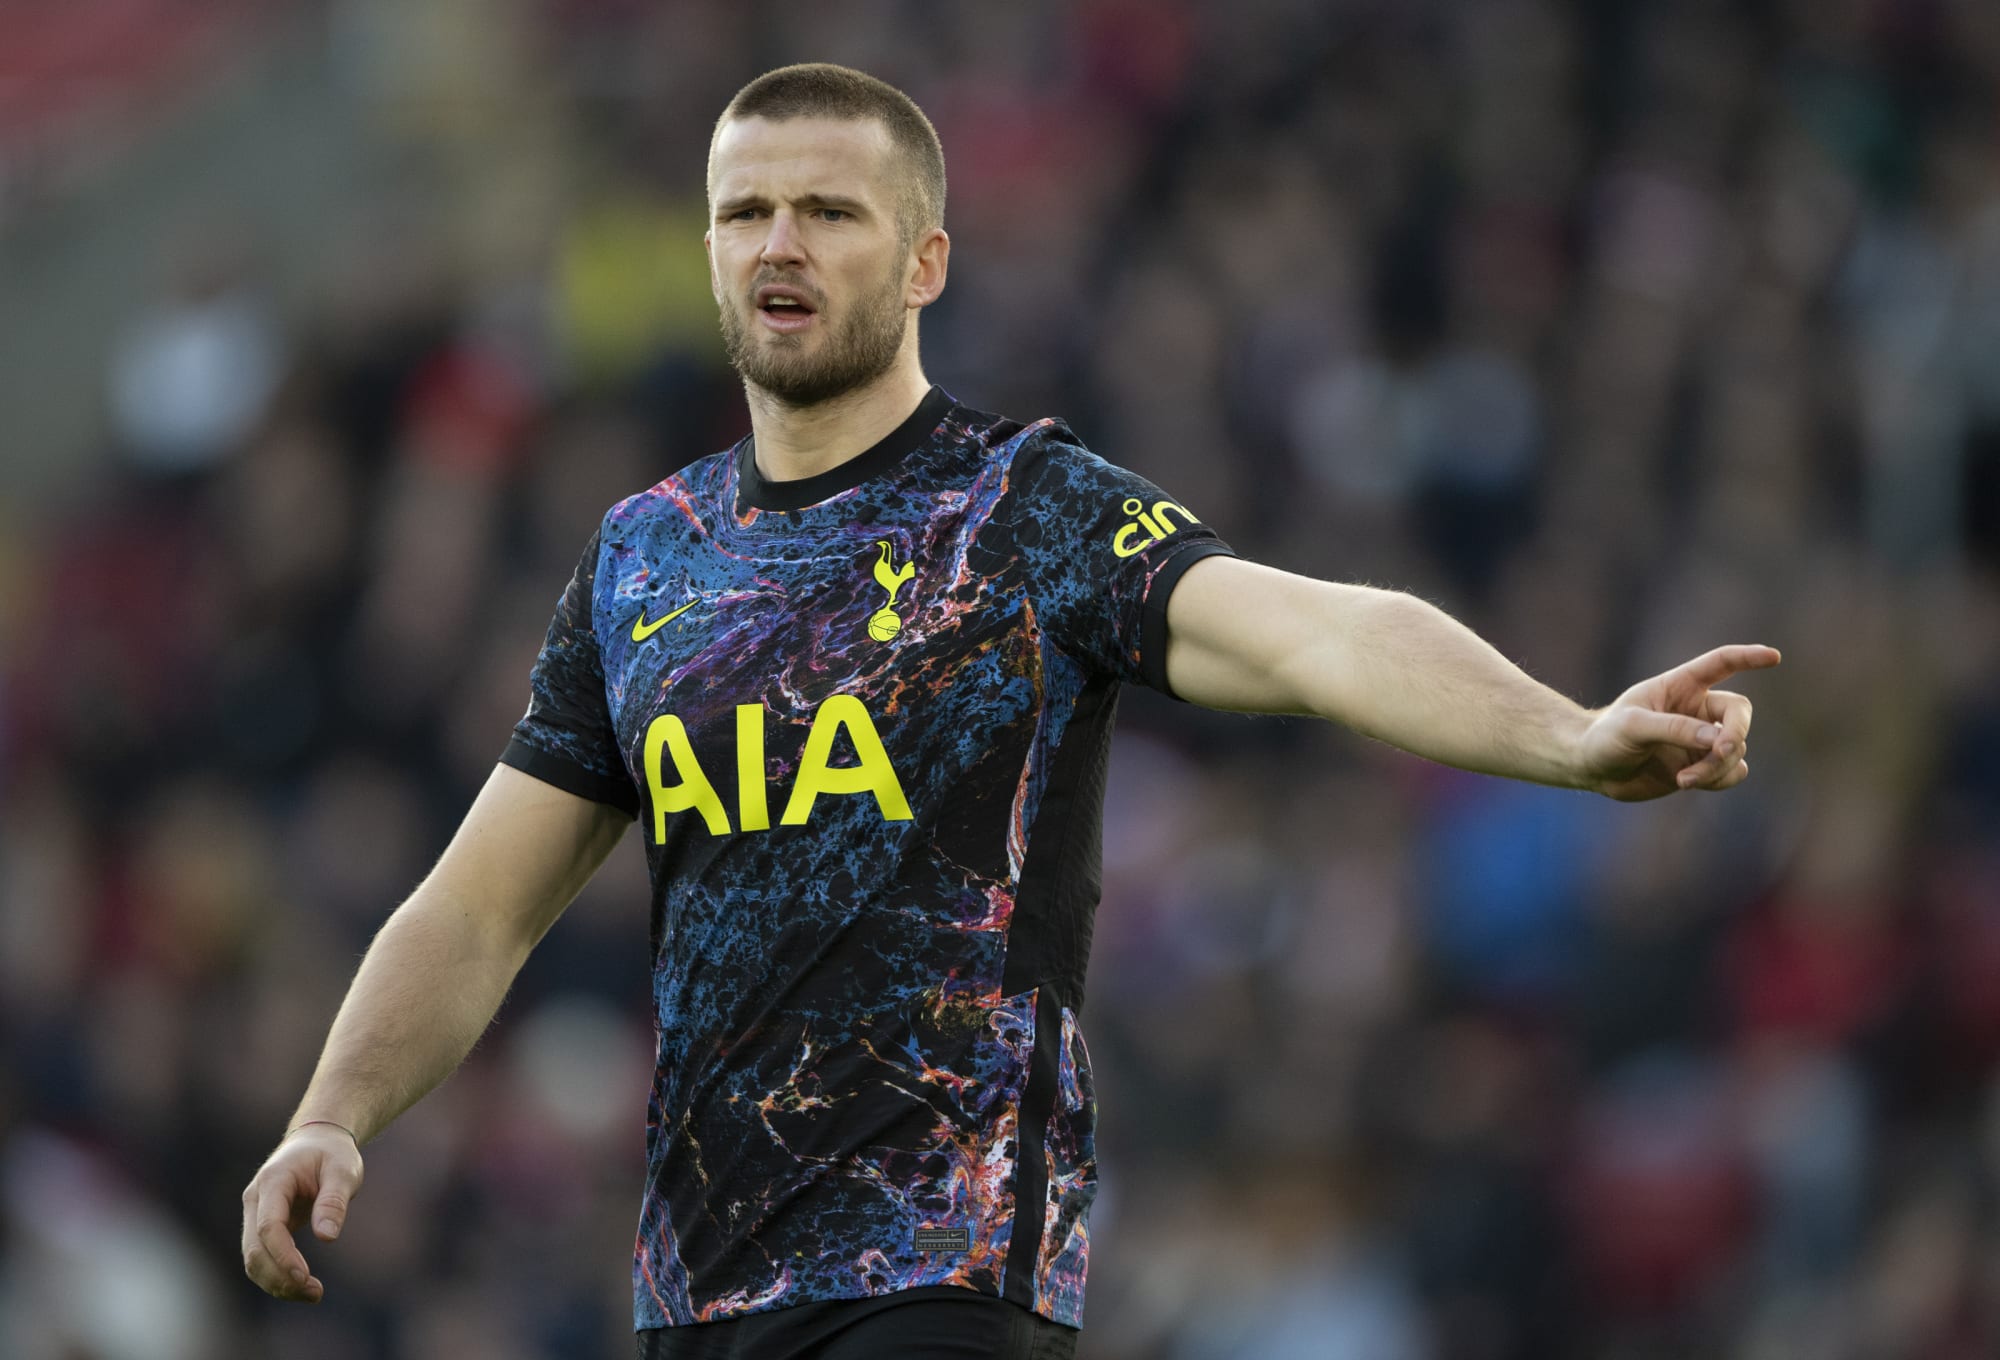 Tottenham Hotspur needs more leaders on defence than Eric Dier